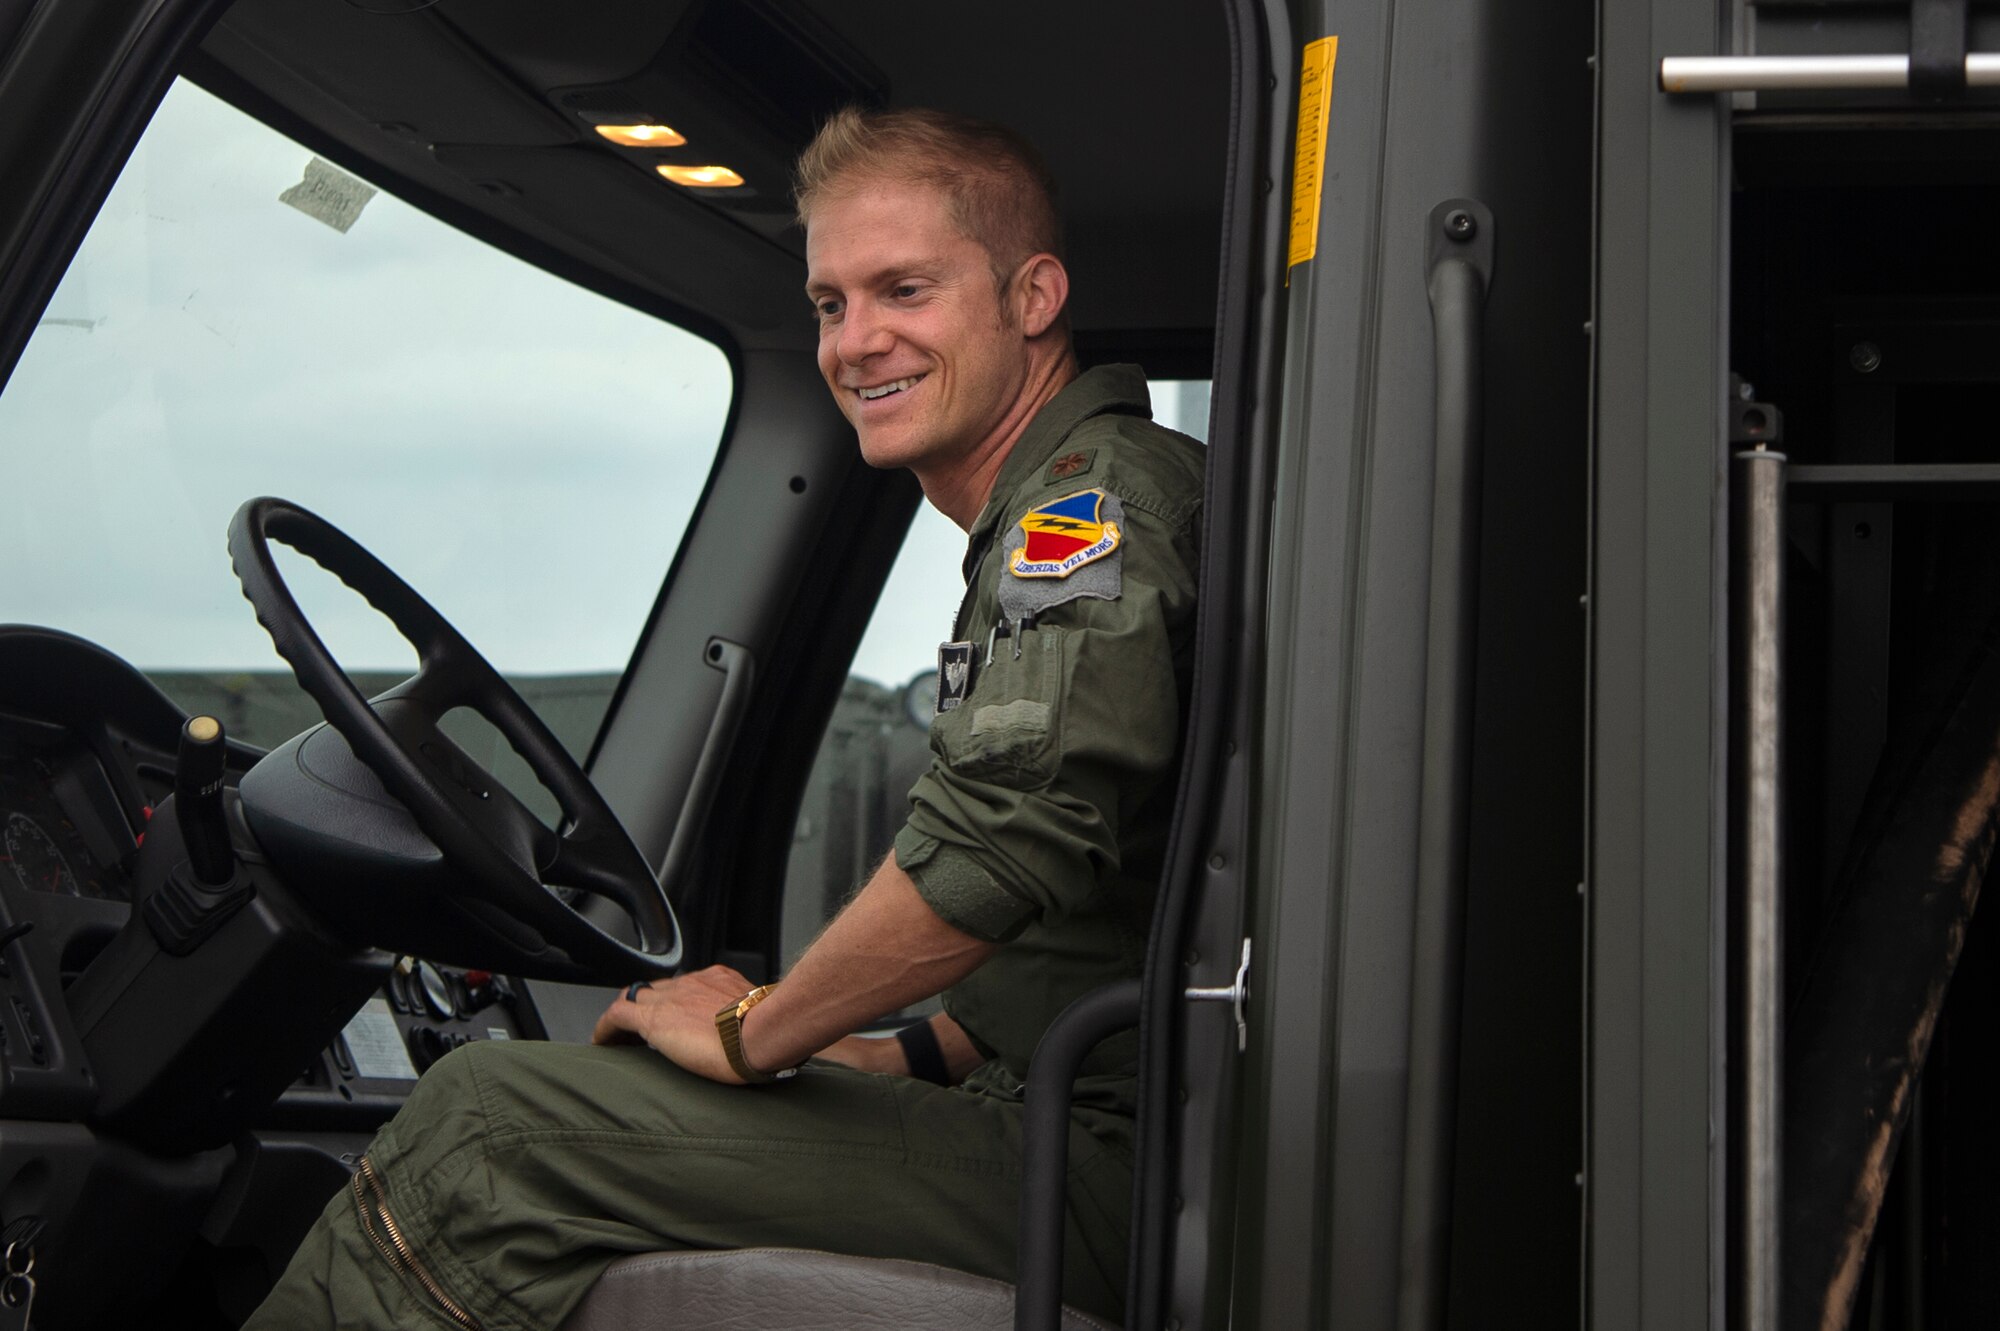 U.S. Air Force Maj. Michael Slotten, 421st Fighter Squadron F-35A Lightning II pilot, sits in a fuel truck at Spangdahlem Air Base, Germany, July 11, 2019. Slotten was stationed at Spangdahlem from 2004 to 2006 as an Airman first class fuels distributor operator. This was his first time driving a fuels truck since commissioning in 2008. (U.S. Air Force photo by Airman 1st Class Valerie Seelye)